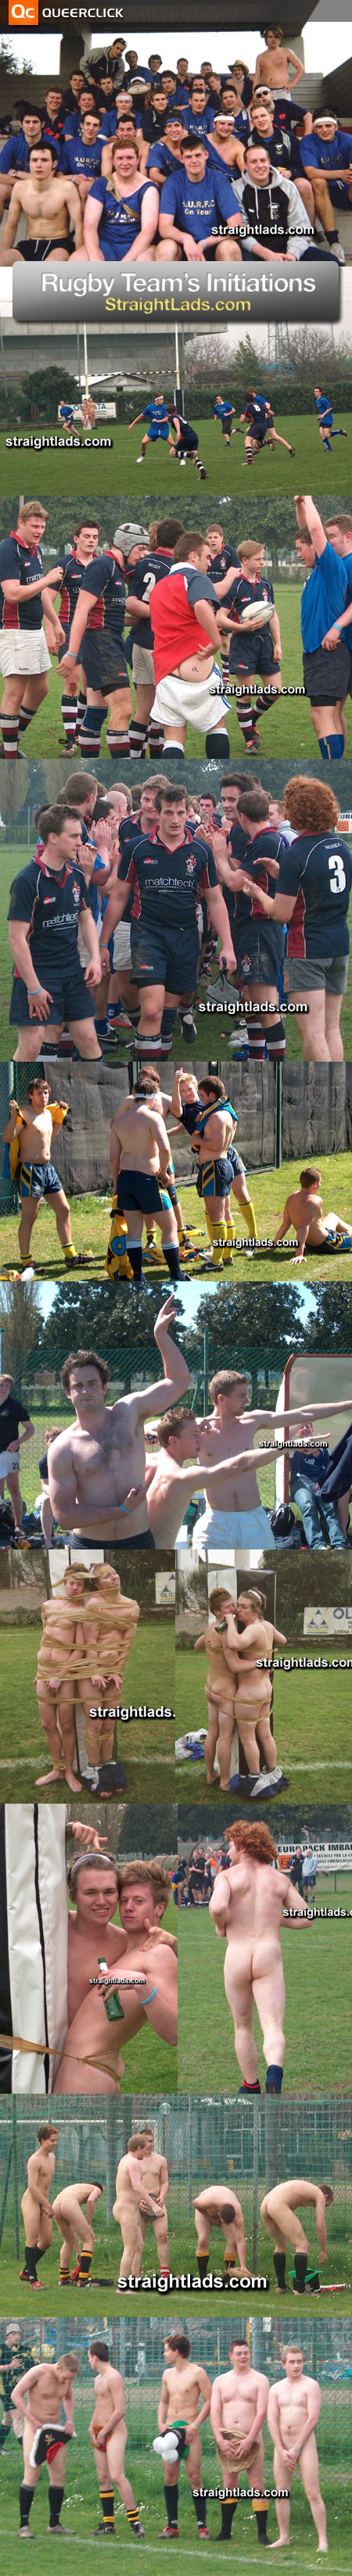 Rugby Team Initiation Rituals at Straight Lads